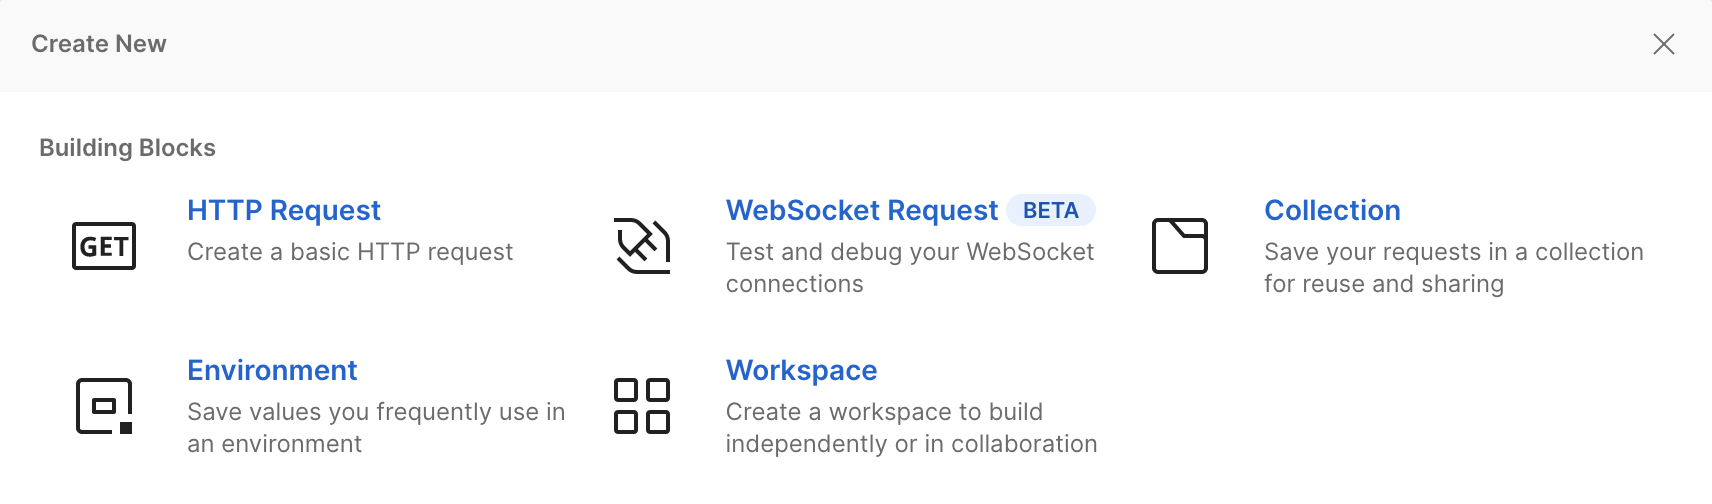 Postman’s Create New request menu, showing HTTP Request under the Building Blocks section